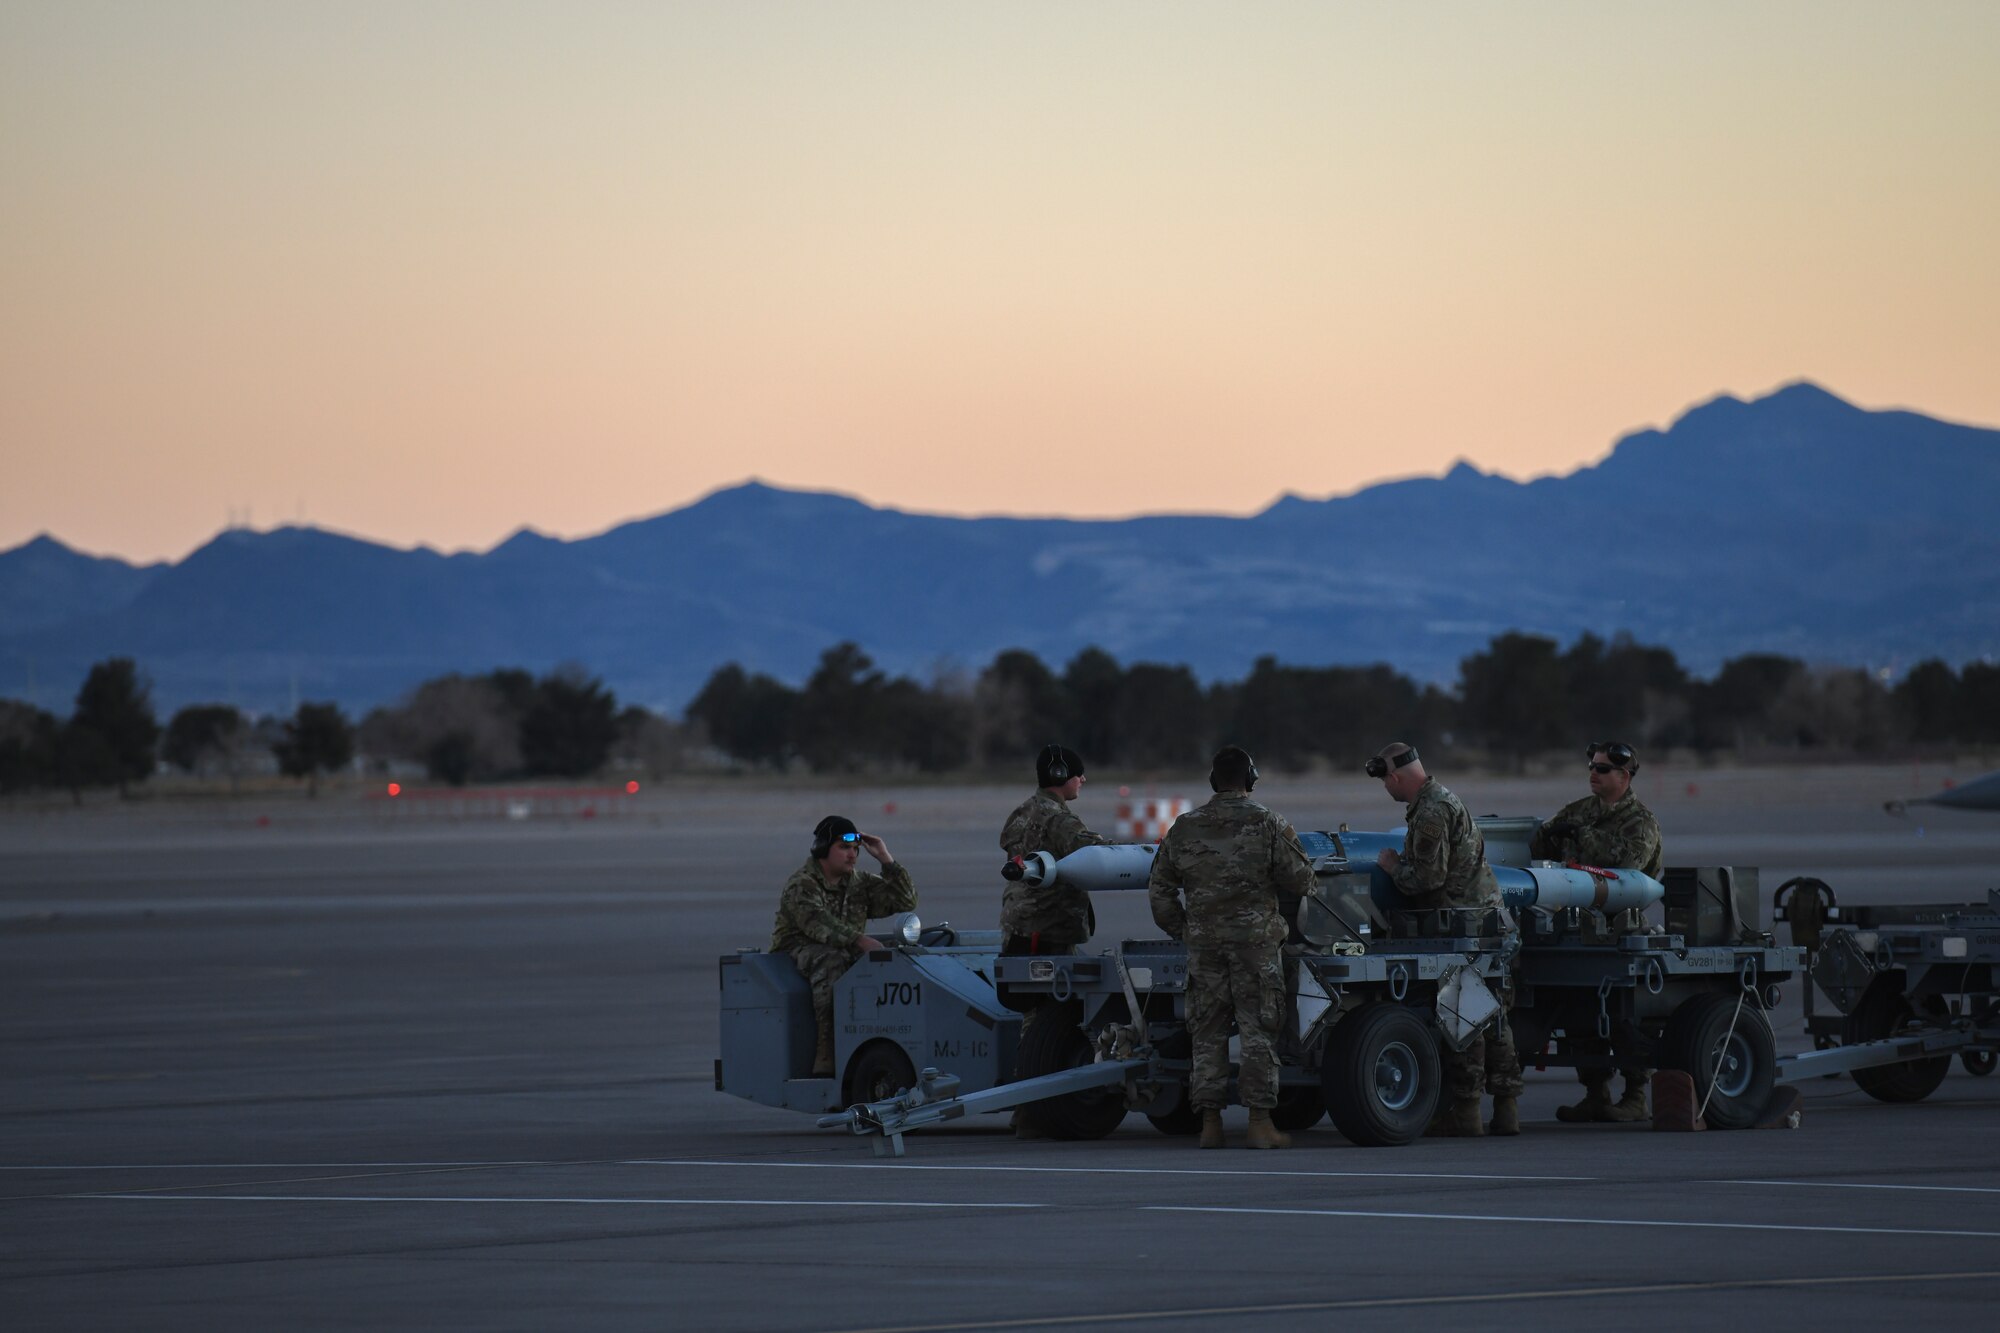 U.S. Air Force Aircraft Armament System Specialists assigned to the 148th Fighter Wing, Minnesota Air National Guard, Duluth, Minn., perform duties on the flight line after the unit’s Block 50 F-16CM Fighting Falcons returned from a training mission at Nellis Air Force Base, Nev., Feb 8, 2022, while participating in Red Flag 22-1.